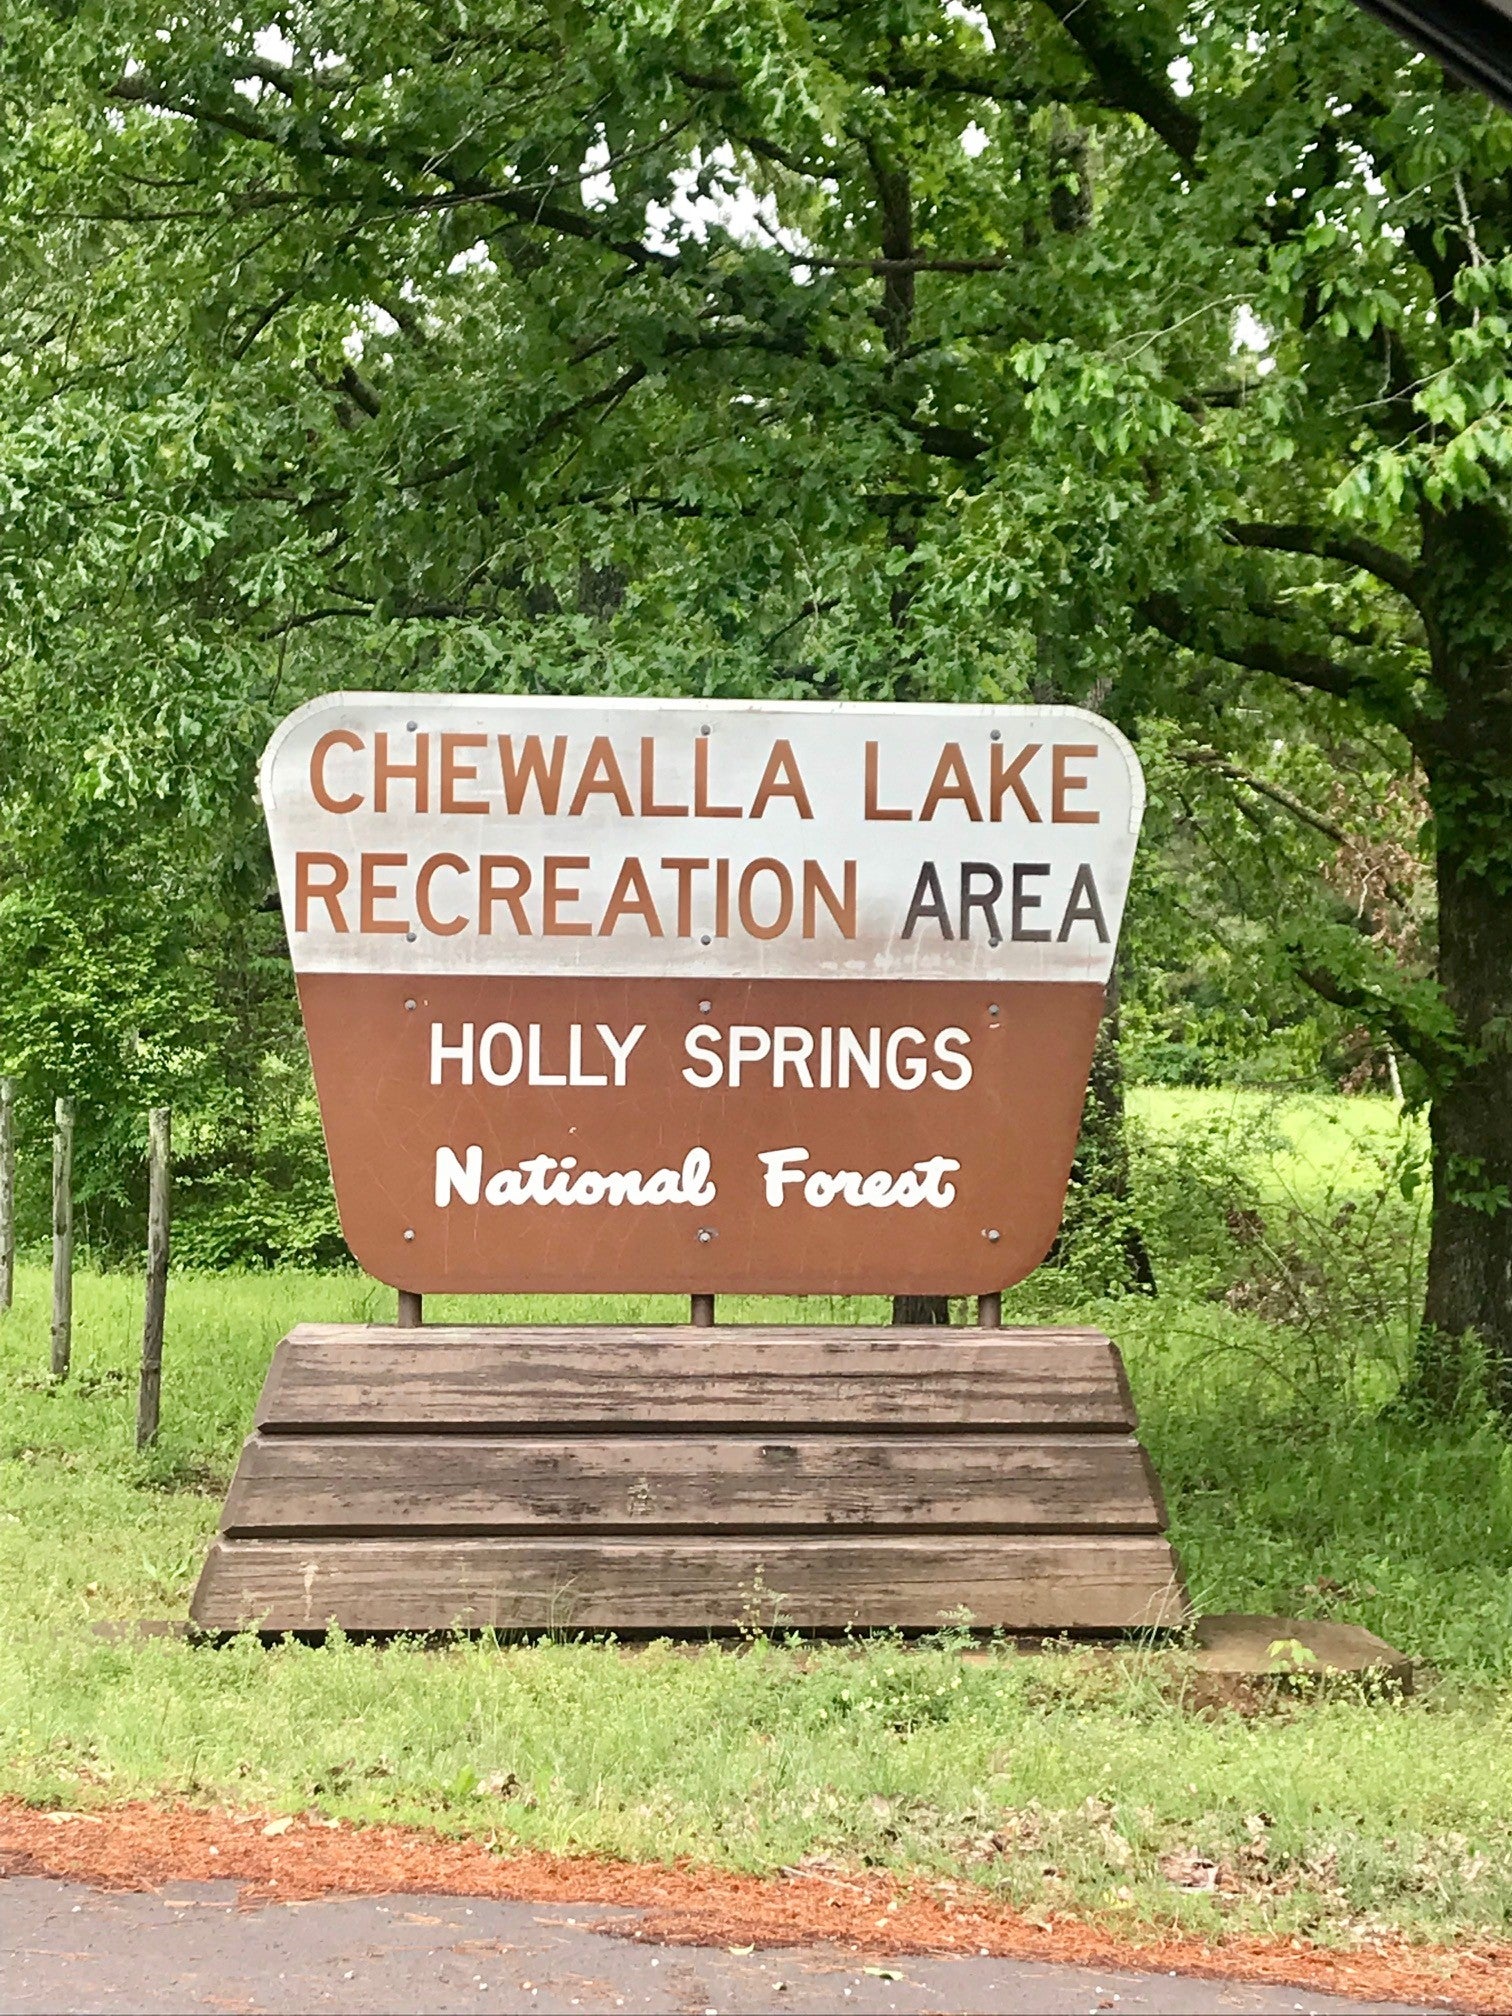 Camper submitted image from Chewalla Lake Recreation Area - 5